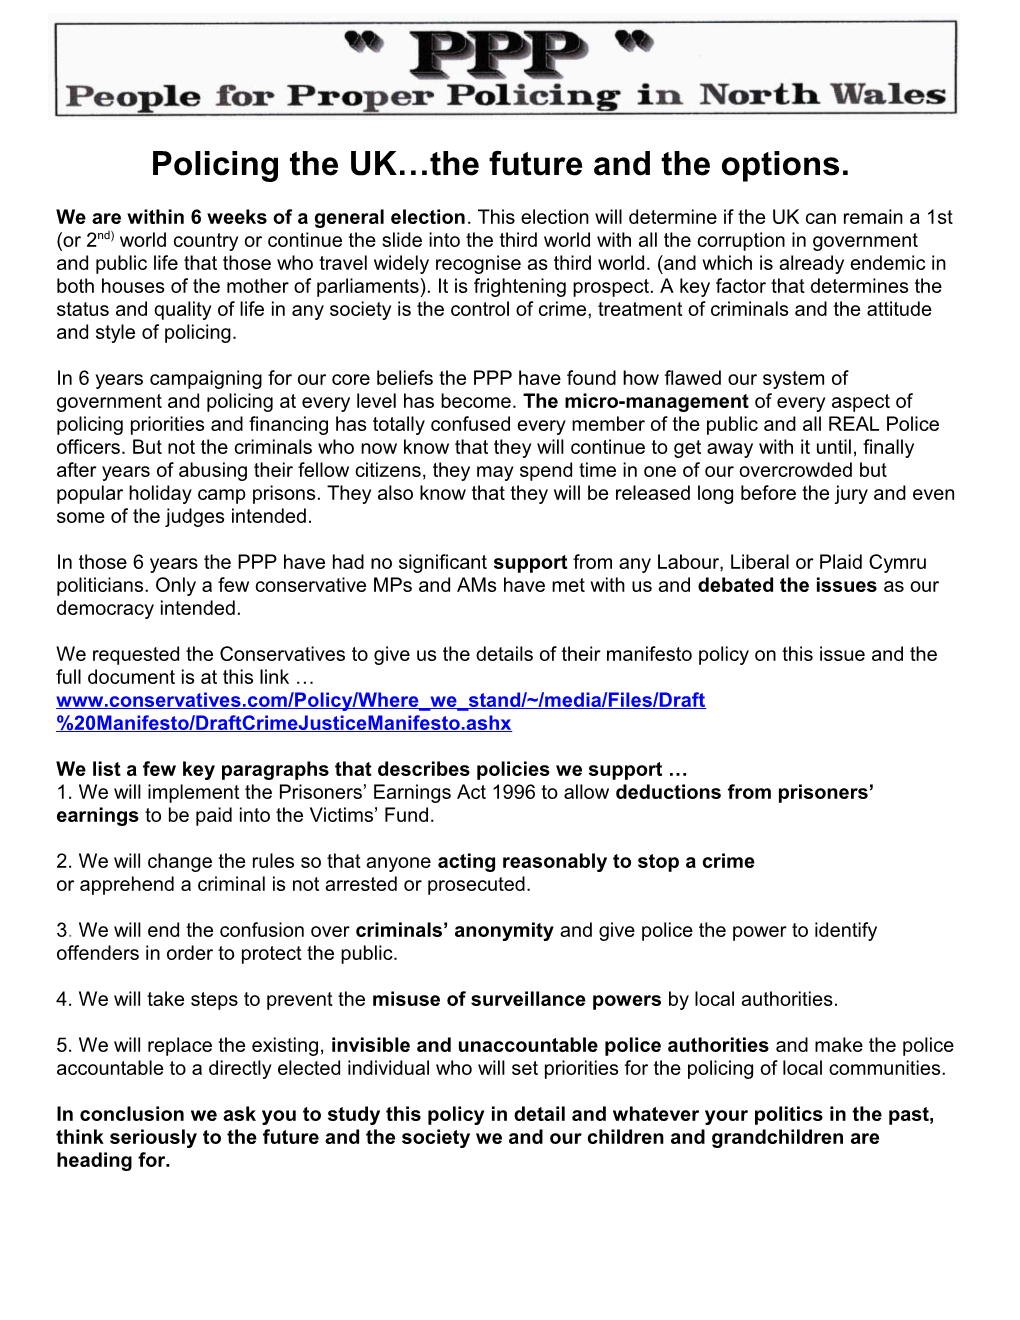 Policing the UK the Future and the Options